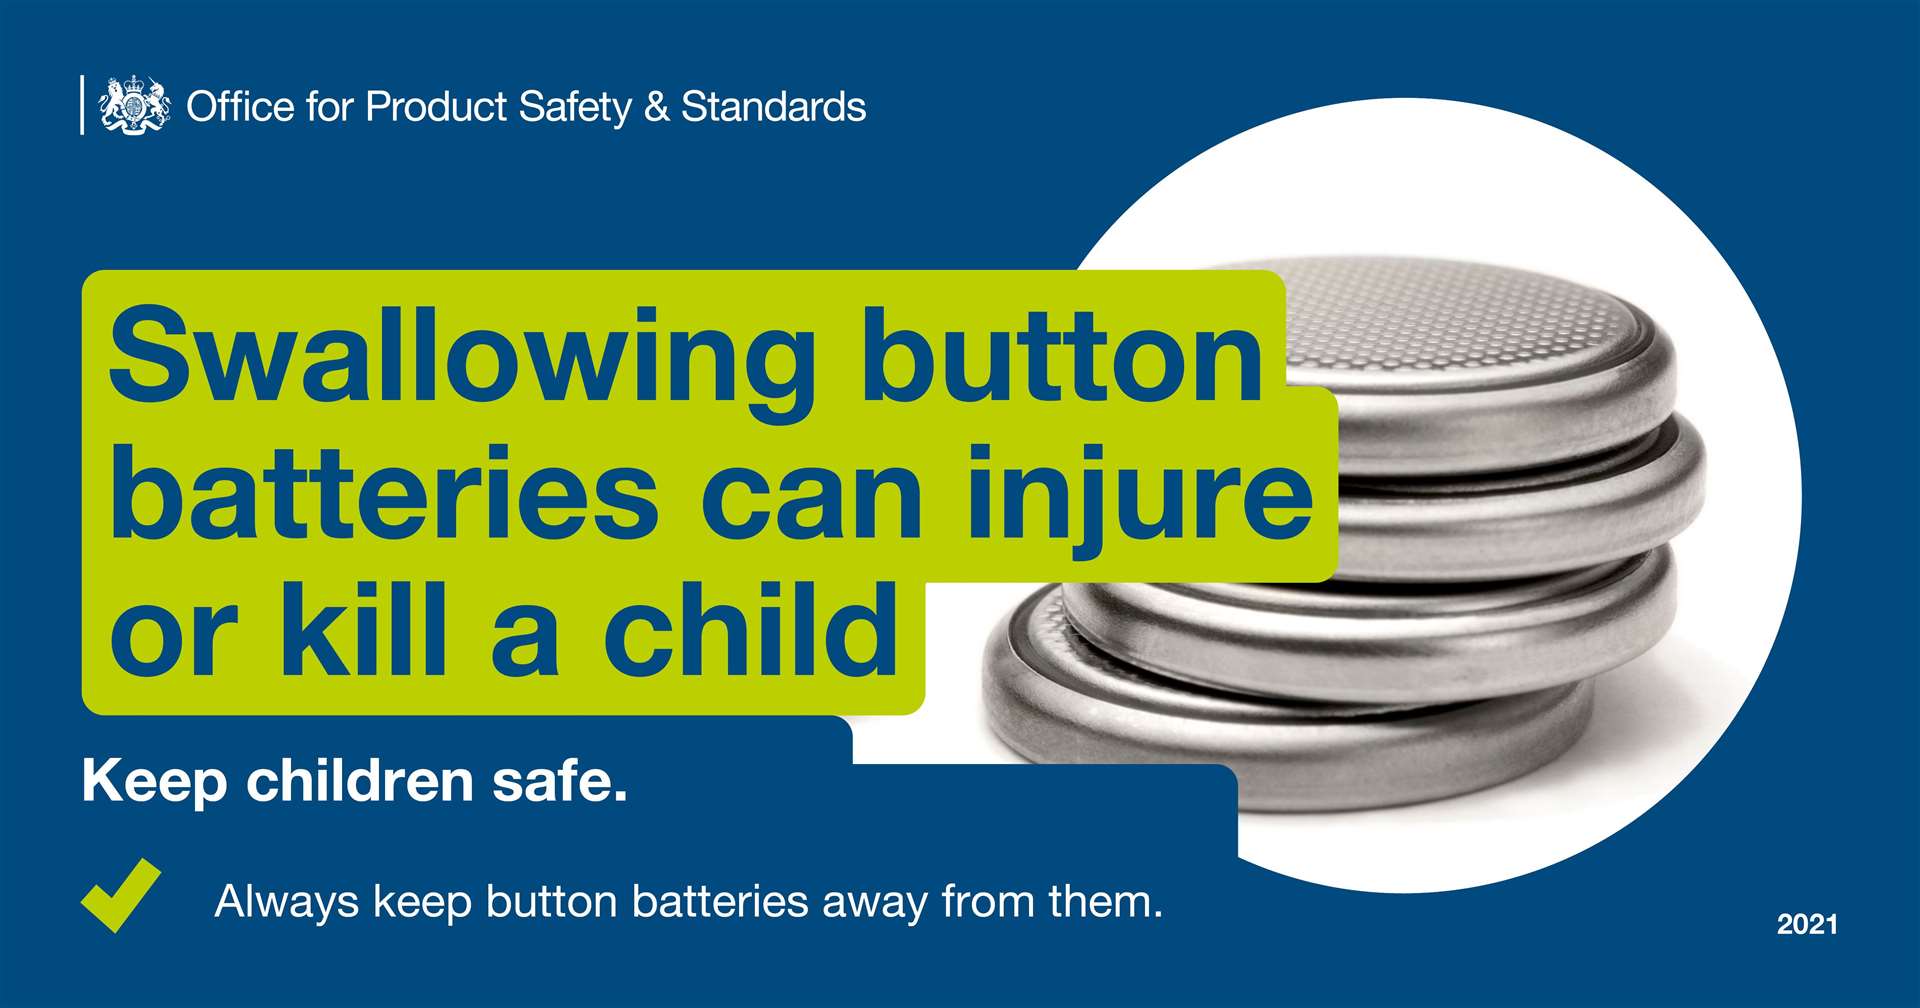 Swallowing a button battery have serious or even fatal consequences if ingested.